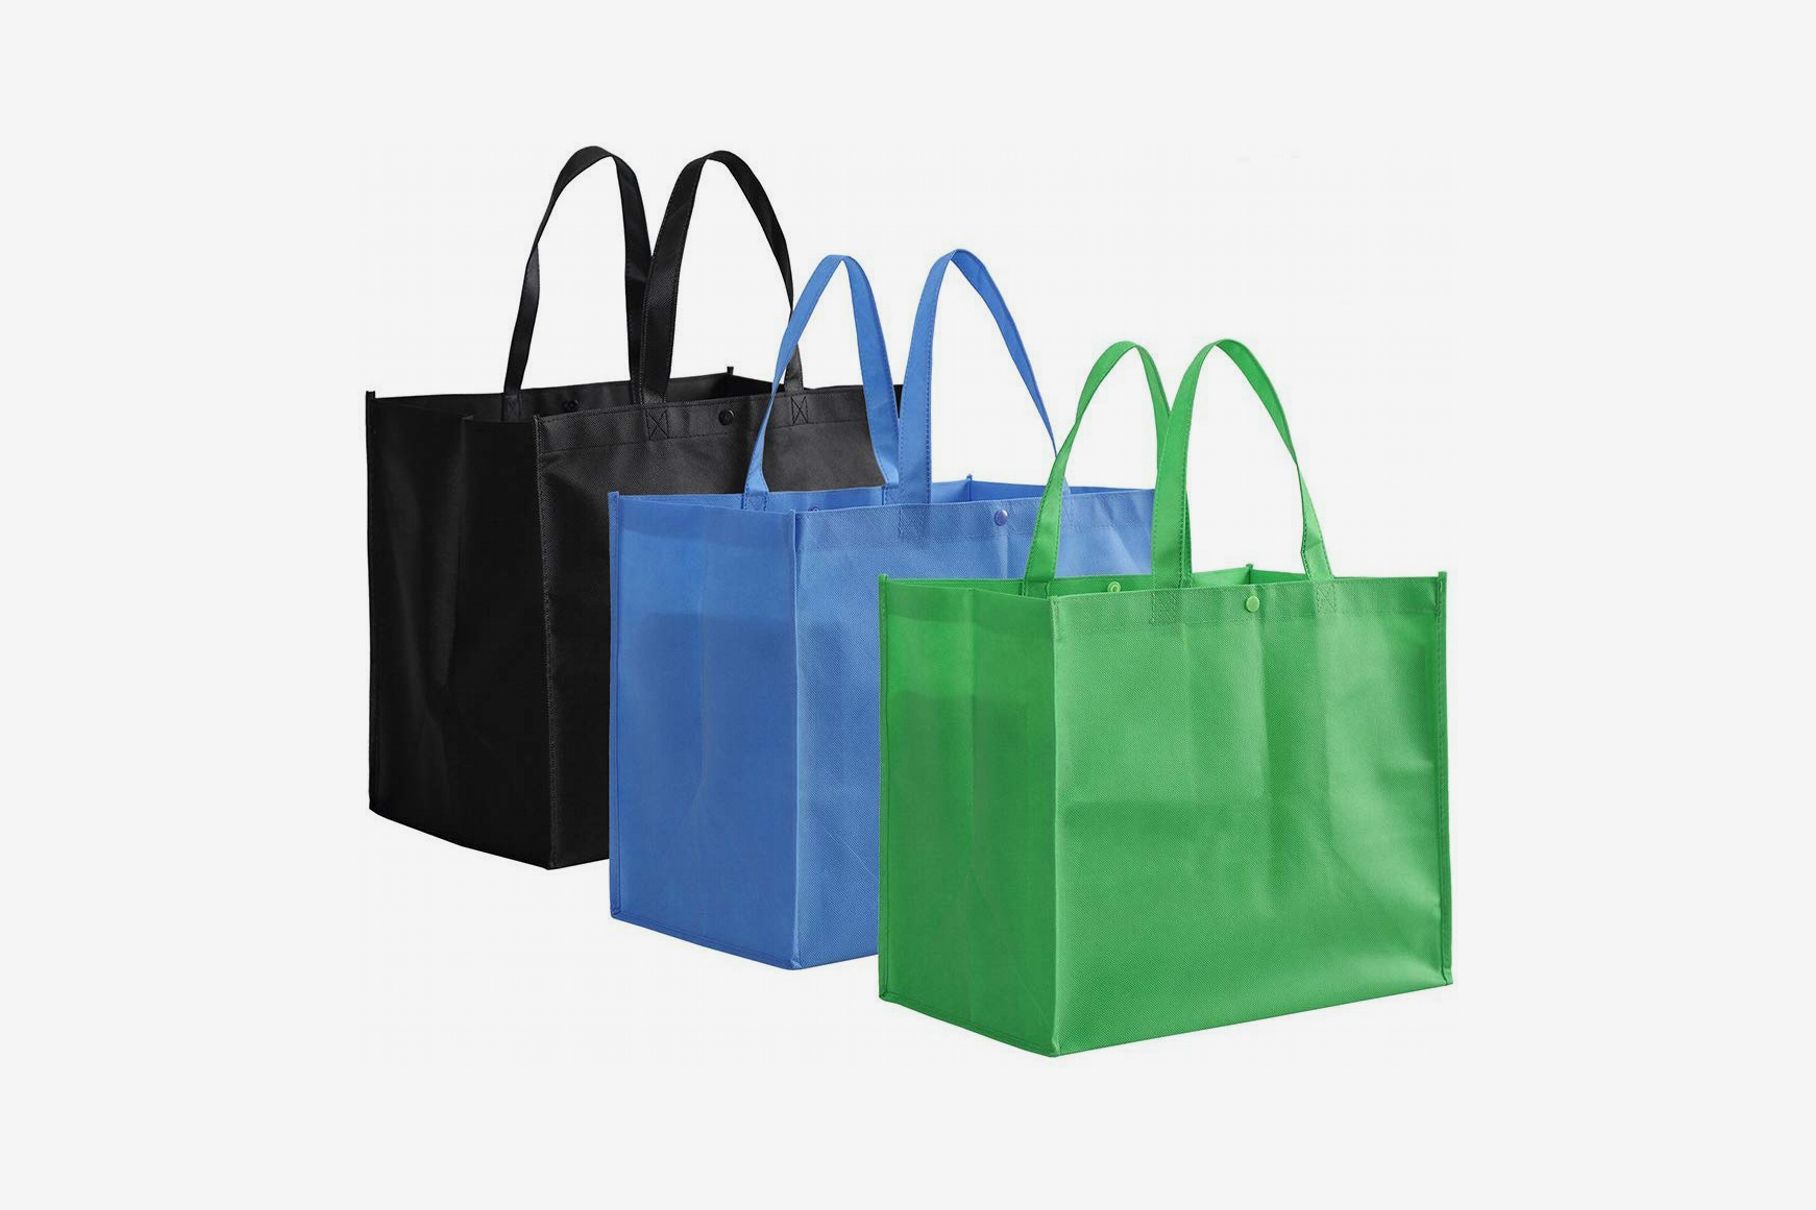 US Home Hot Foldable Recycle Shopping Reusable Grocery Food Vegetable Tote Bags 